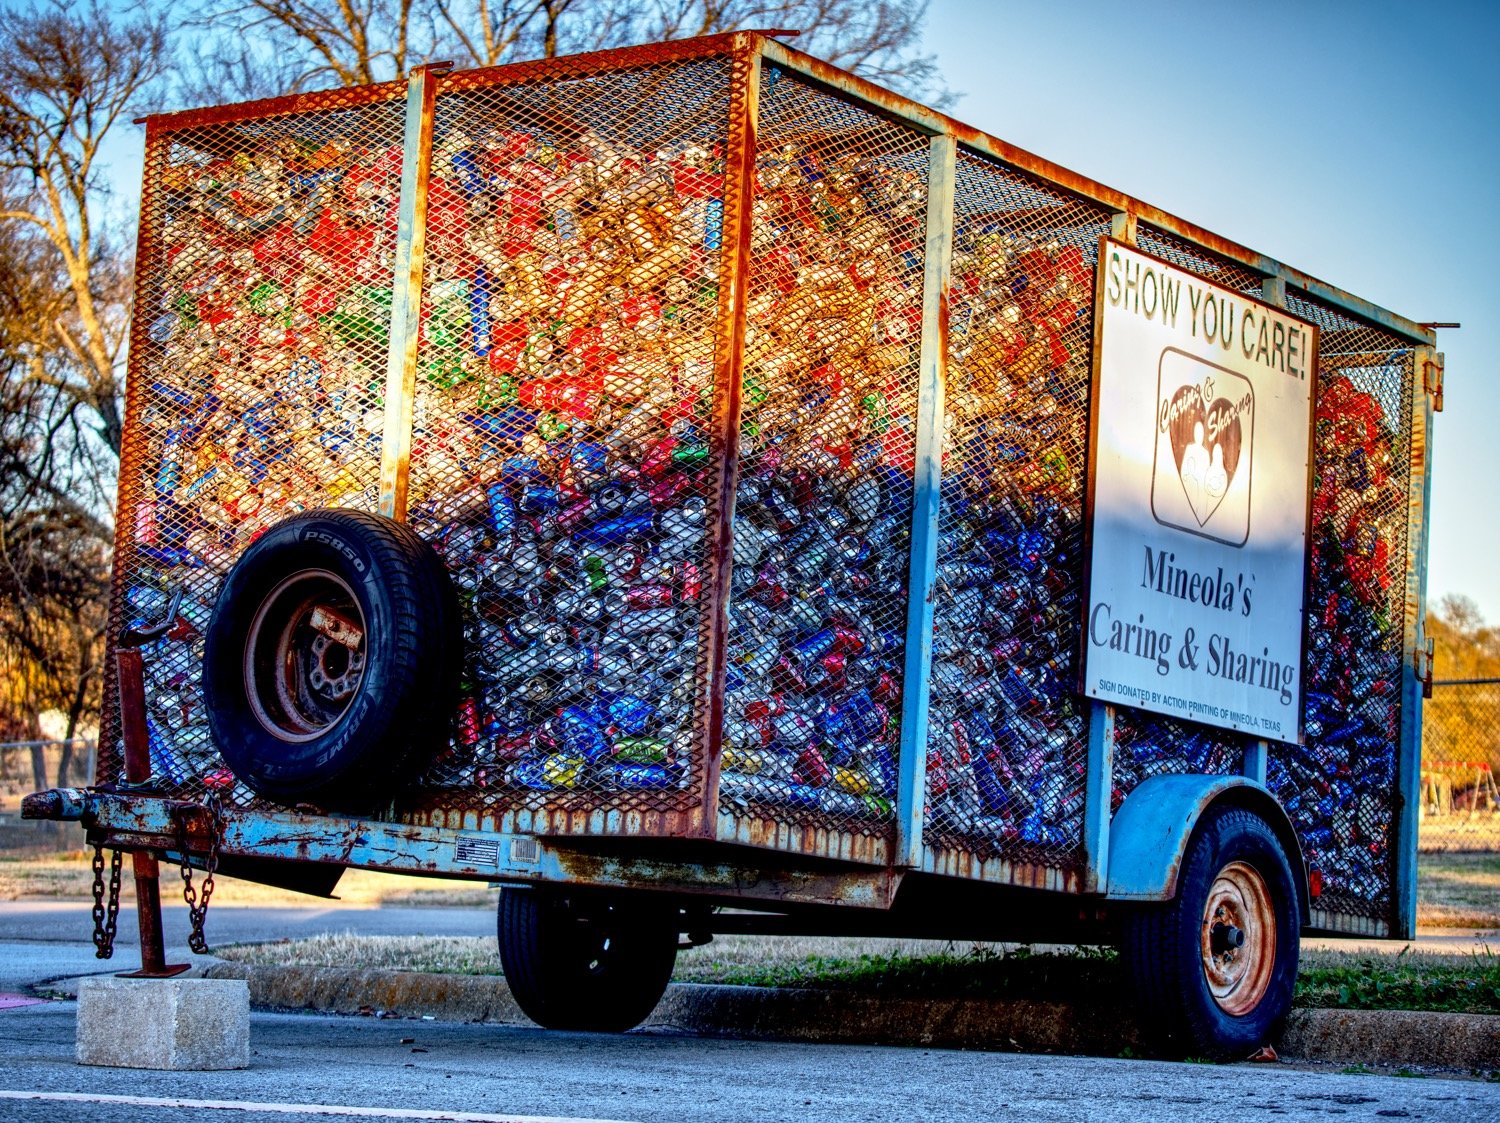 Aluminum cans can be recycled behind Brookshire’s Grocery in Mineola to the benefit of the Caring & Sharing program.